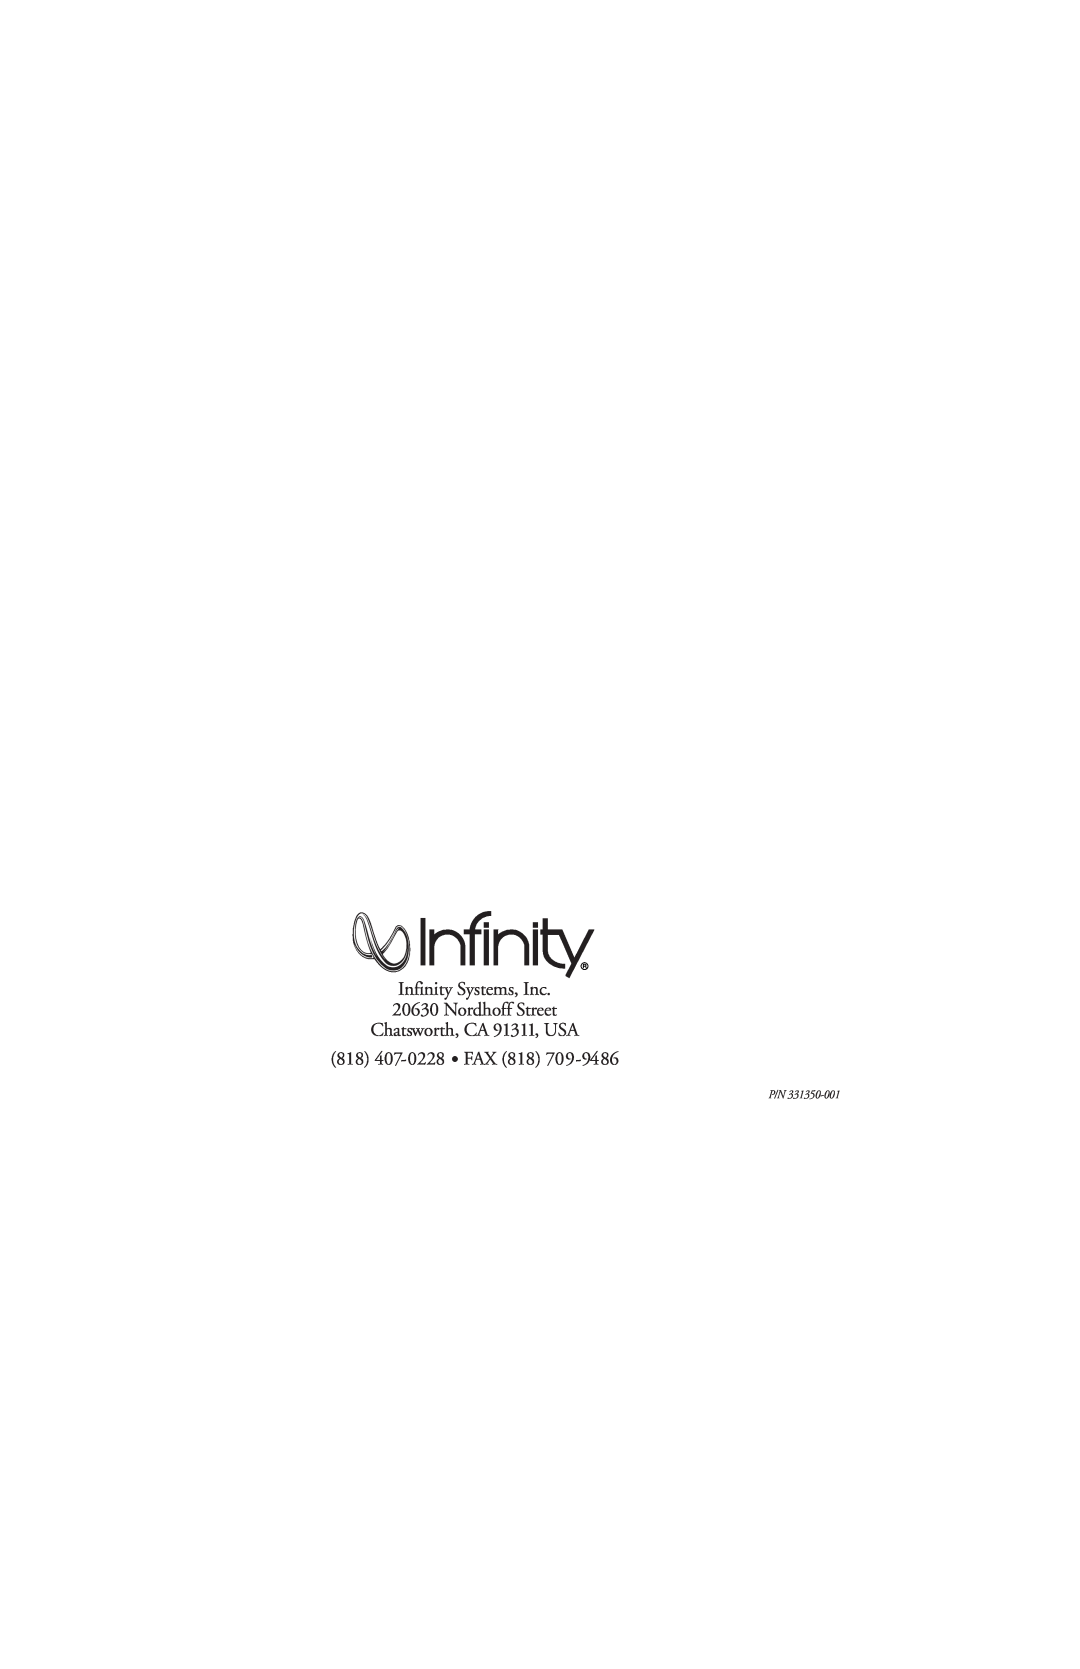 Infinity OVTR 3, OVTR 2 owner manual Infinity Systems, Inc 20630 Nordhoff Street, Chatsworth, CA 91311, USA 818 407-0228 FAX 